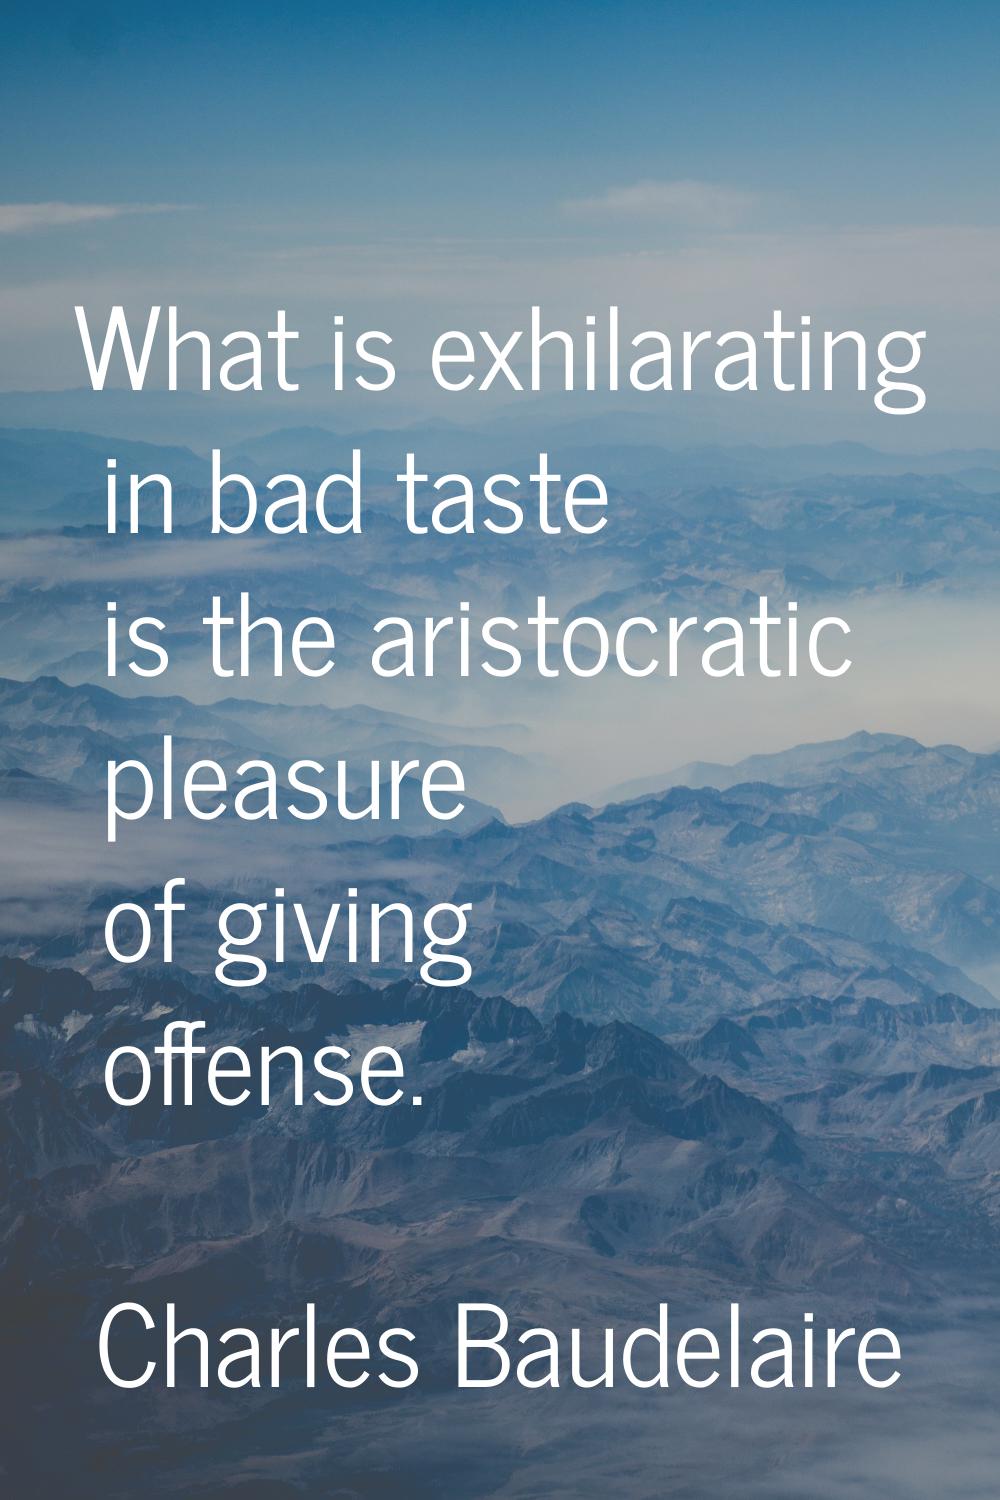 What is exhilarating in bad taste is the aristocratic pleasure of giving offense.